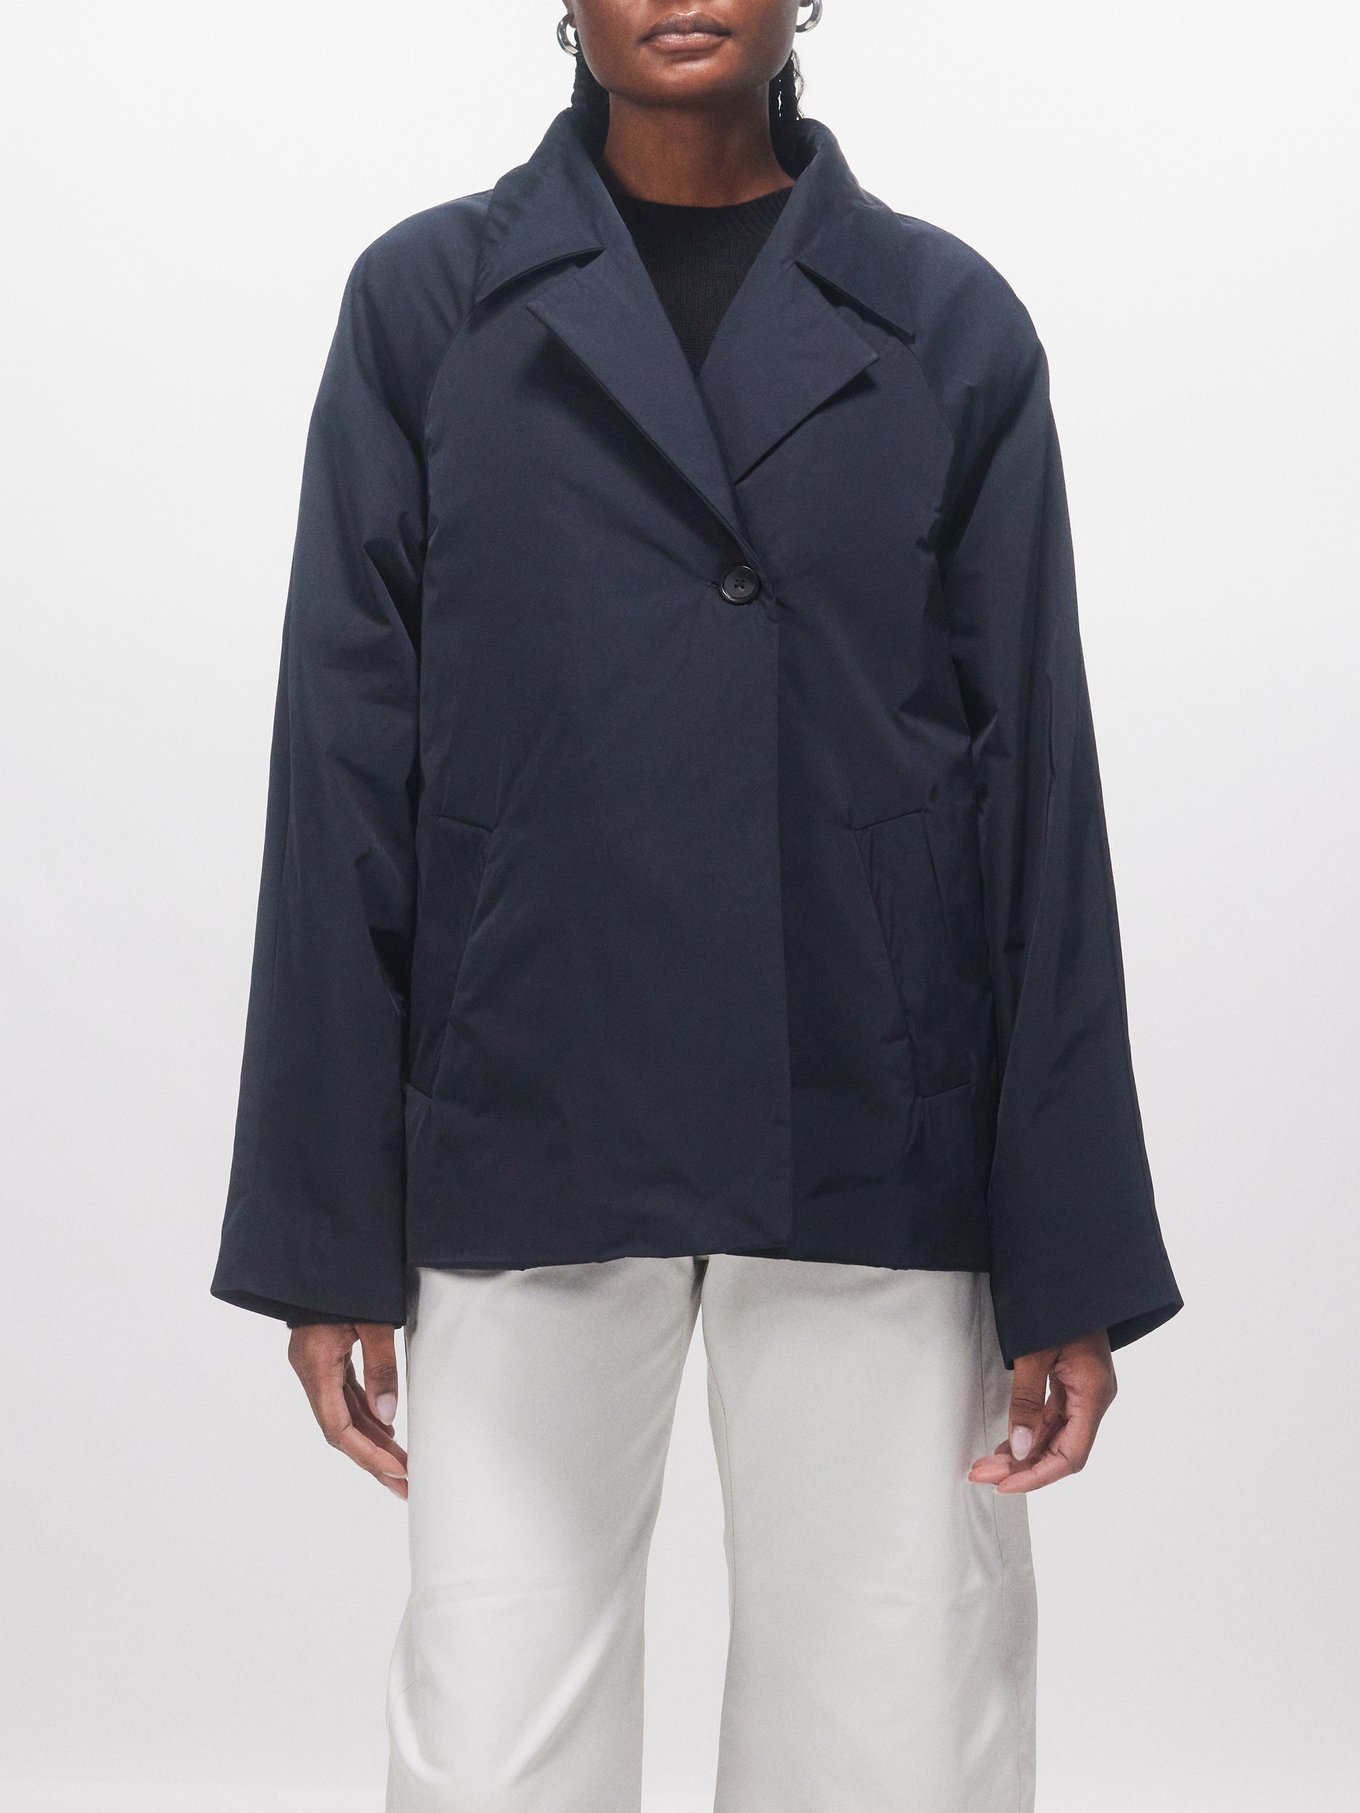 kaval 20SS new simple jacket trousers - スーツ